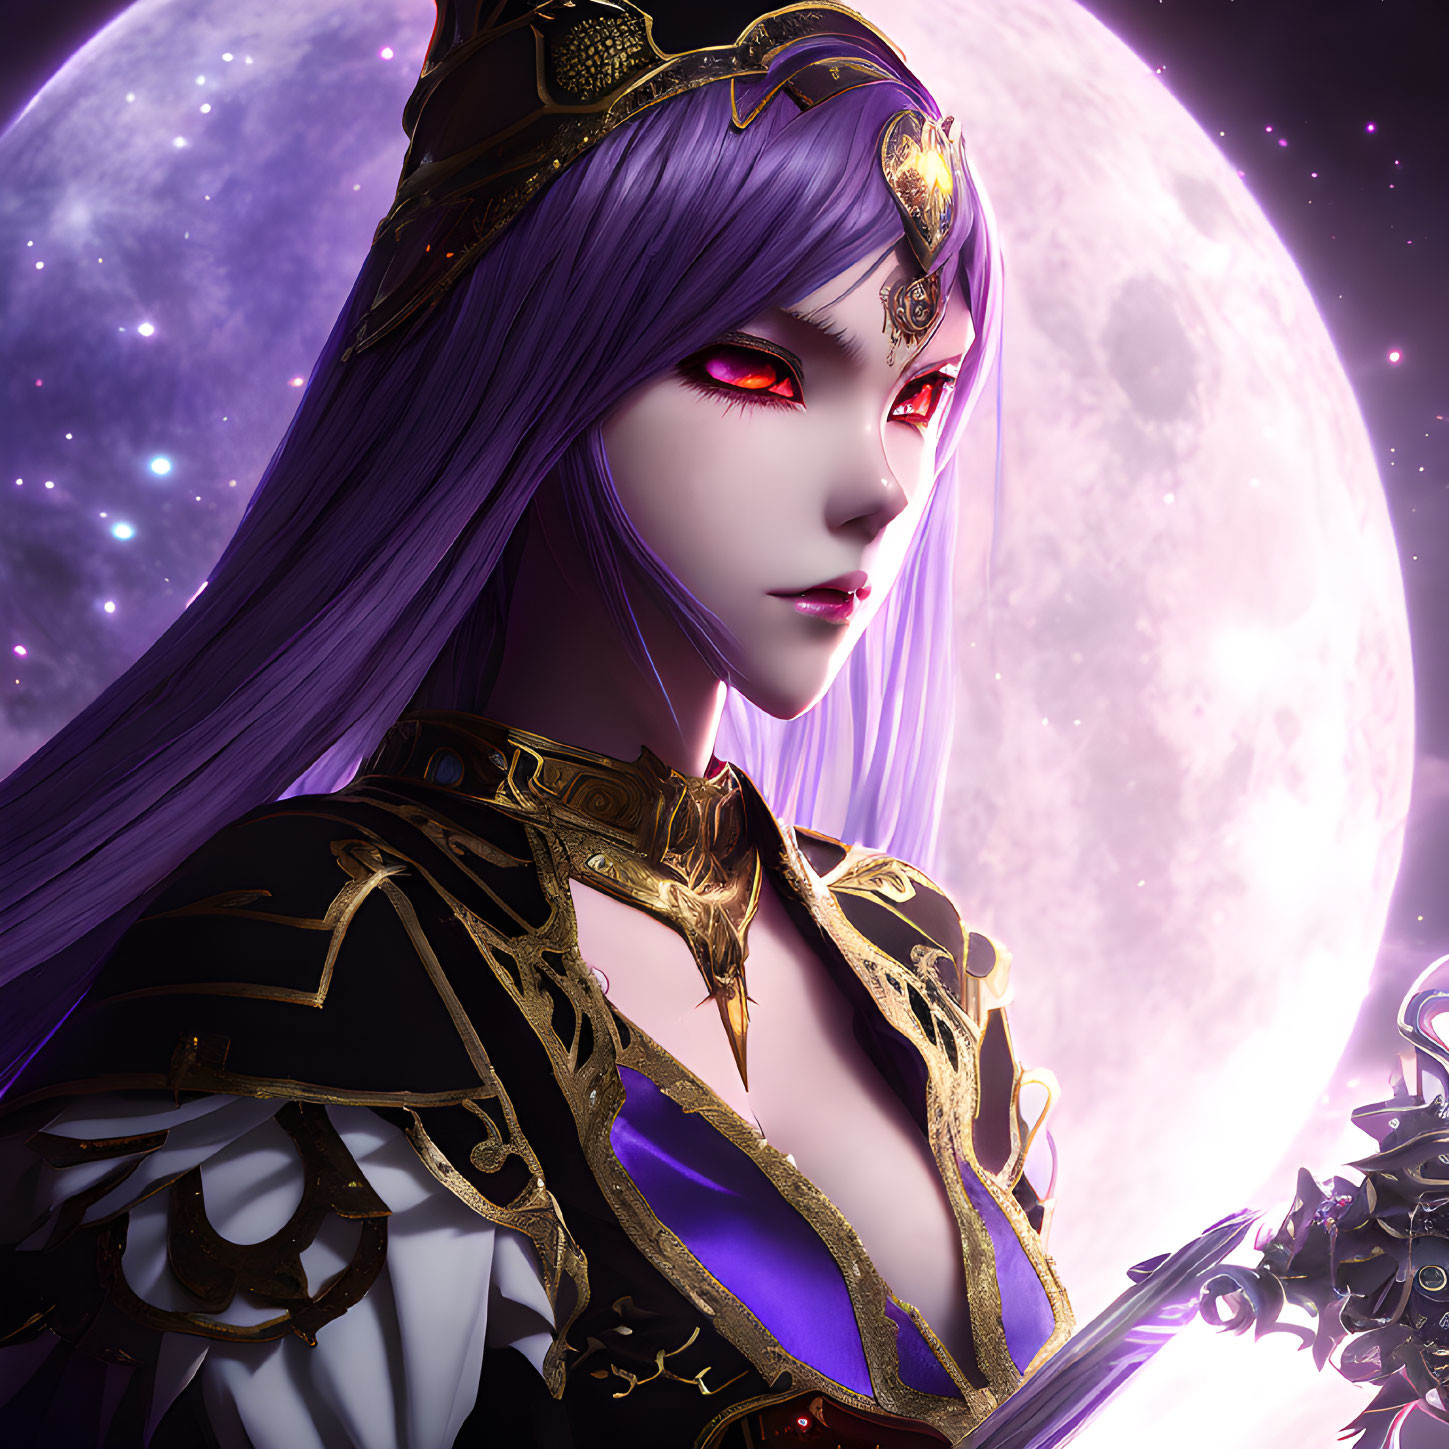 Fantasy character with purple hair and red eyes in regal black and gold armor against moon backdrop